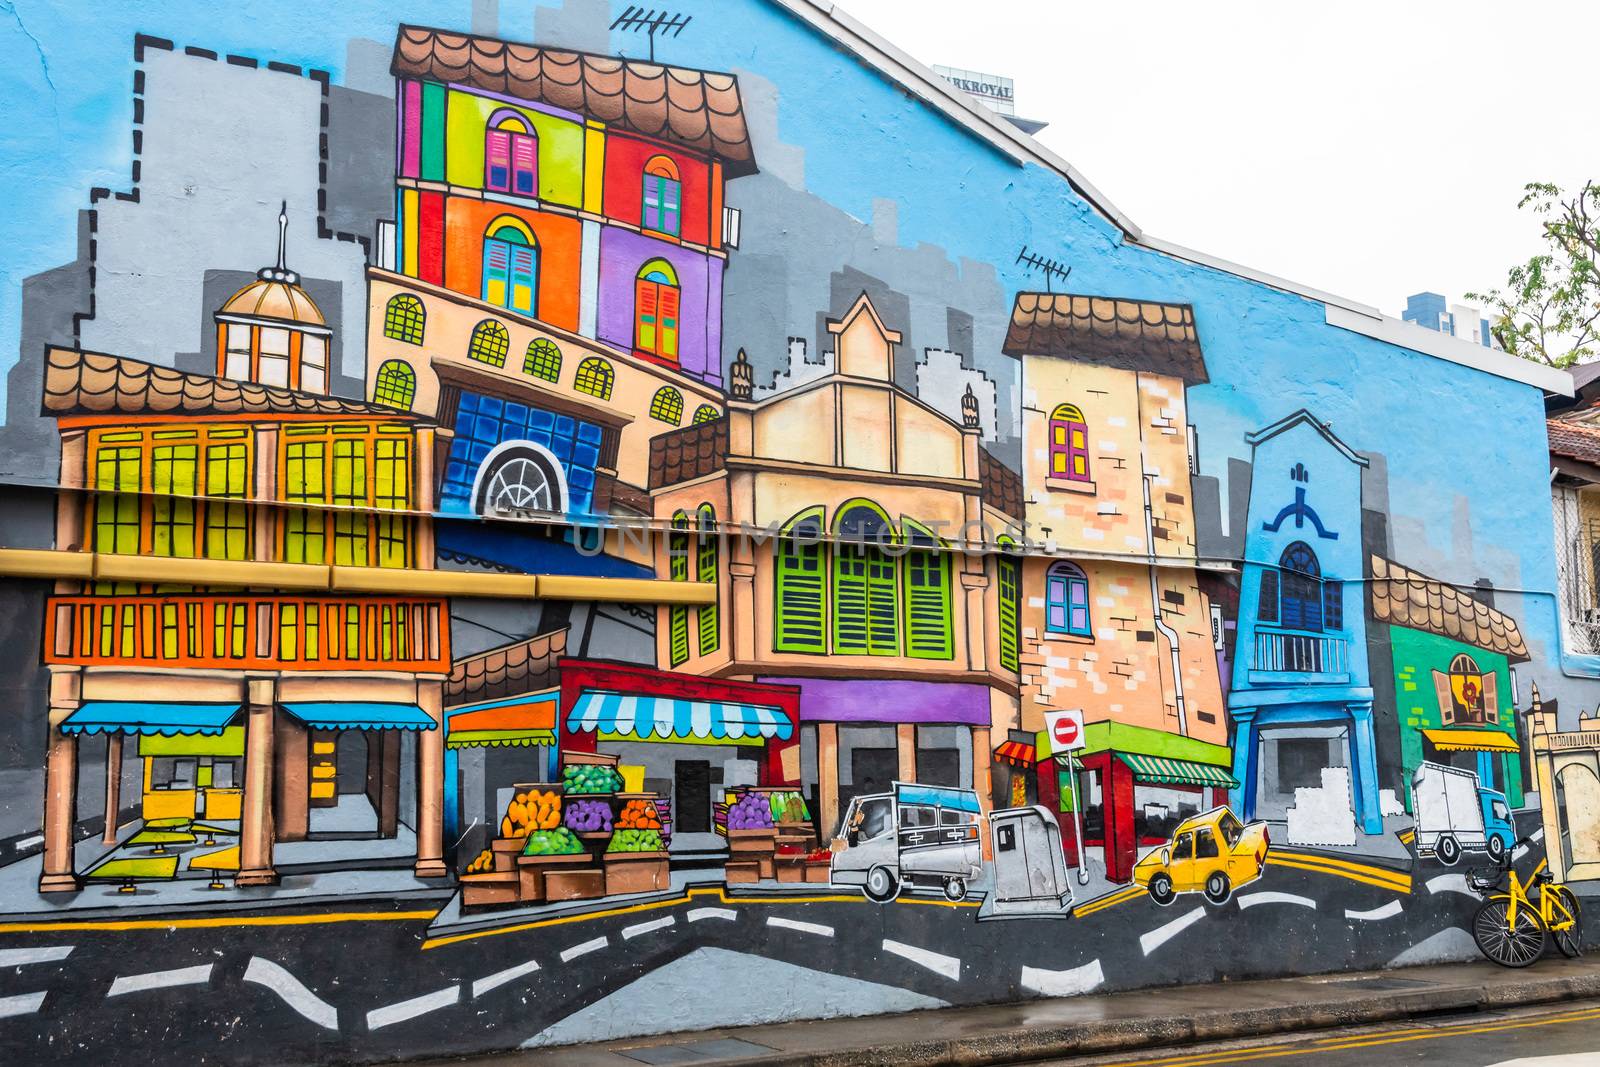 Colourful city painted on the side wall of a building, Singapore by mauricallari